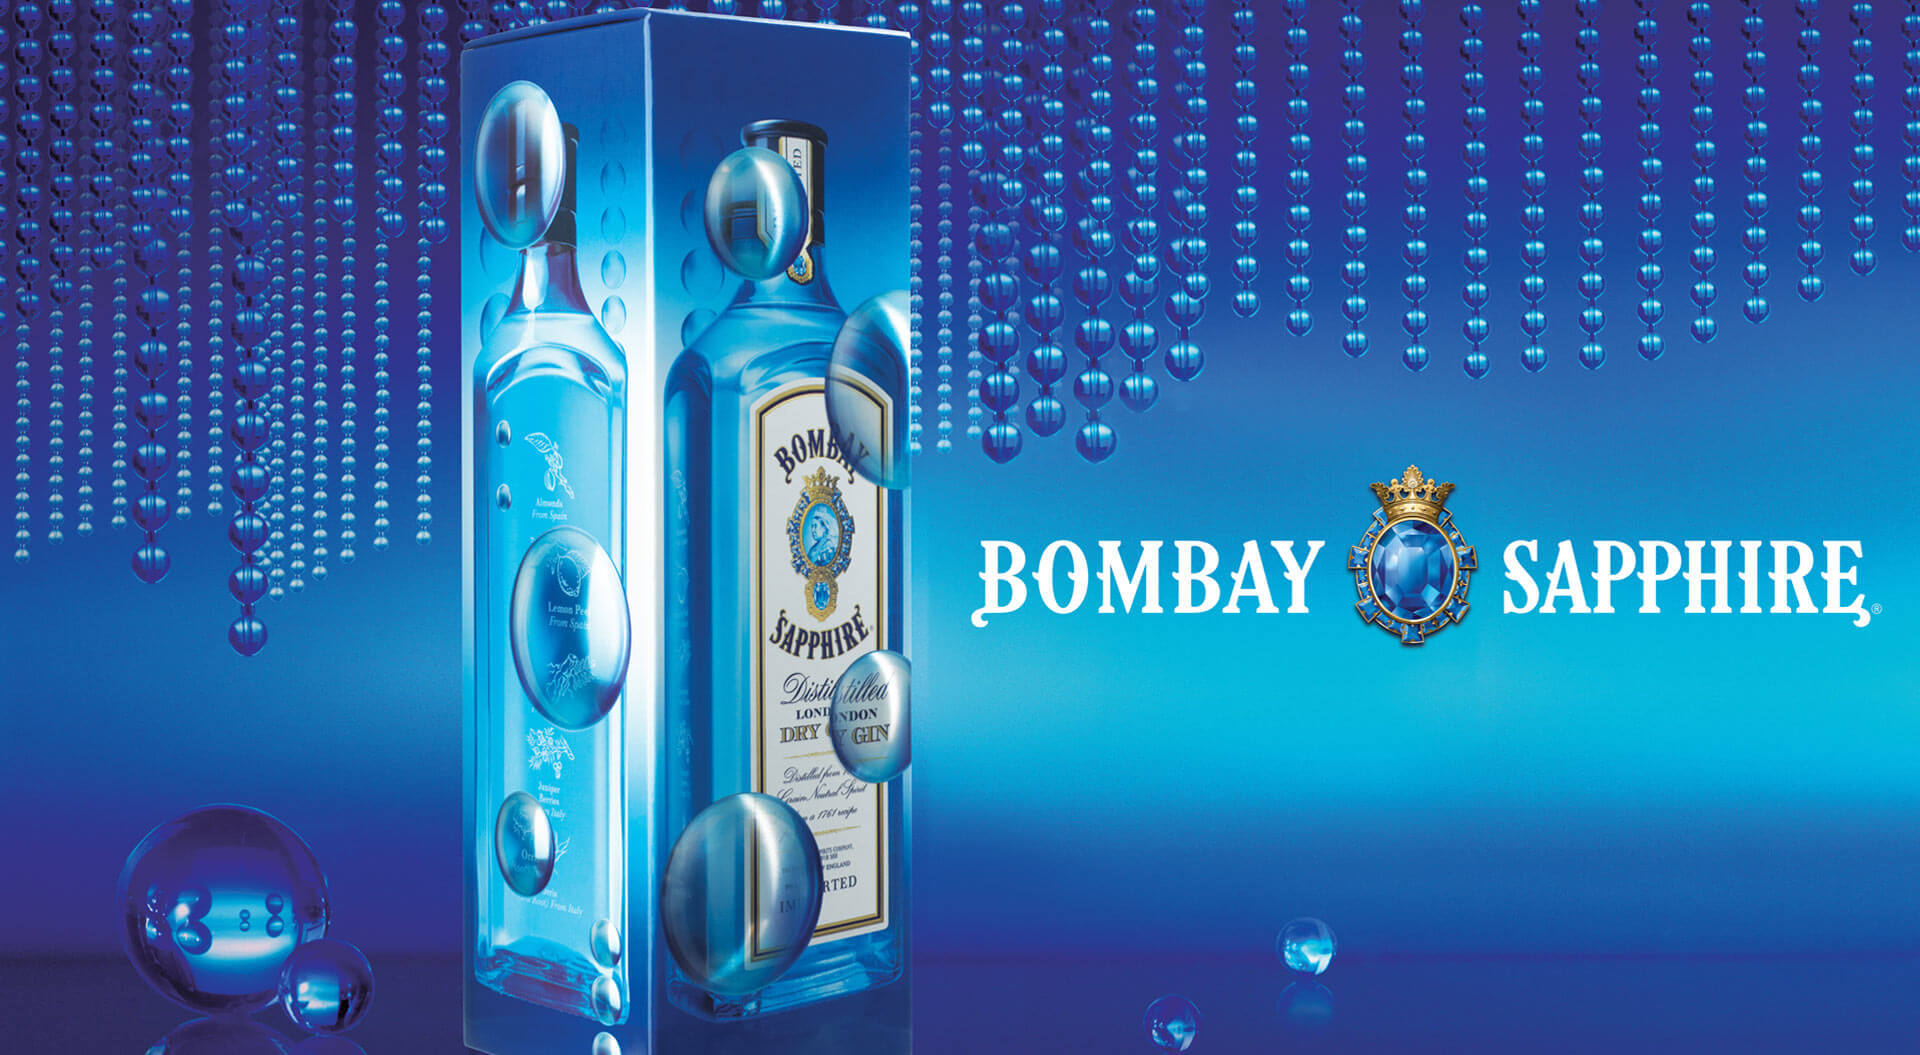 Bombay Sapphire Reign packaging design striking visual effect 